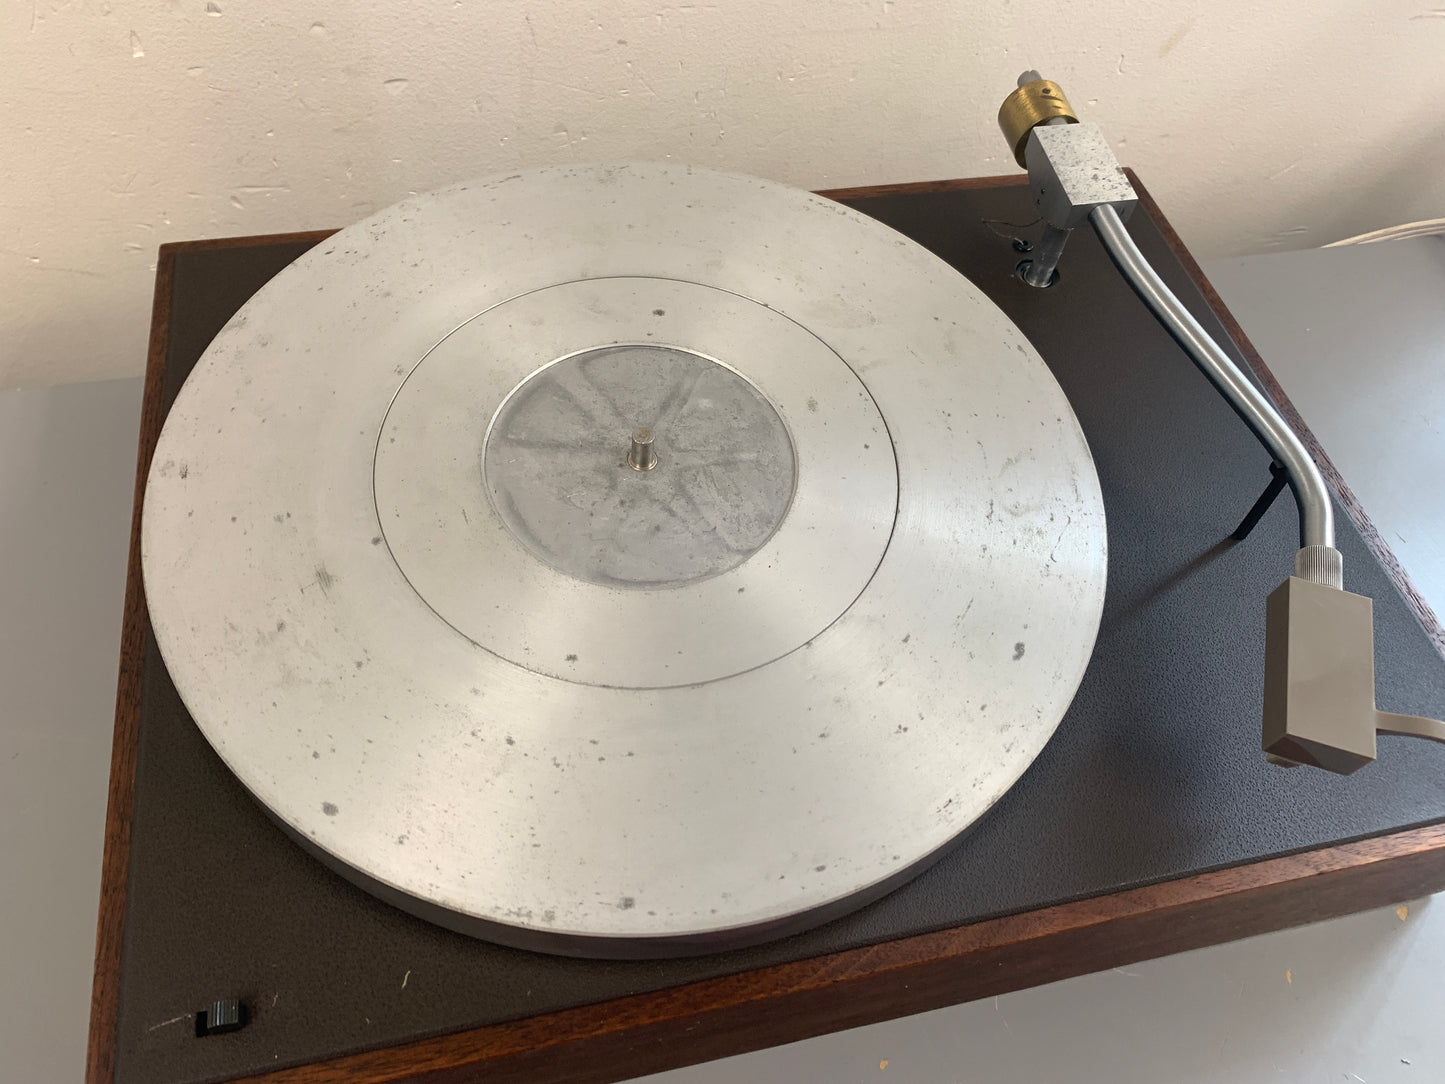 Acoustic Research XA Turntable * Fully Serviced * New Belt * $100 Flat Shipping CONUS Only